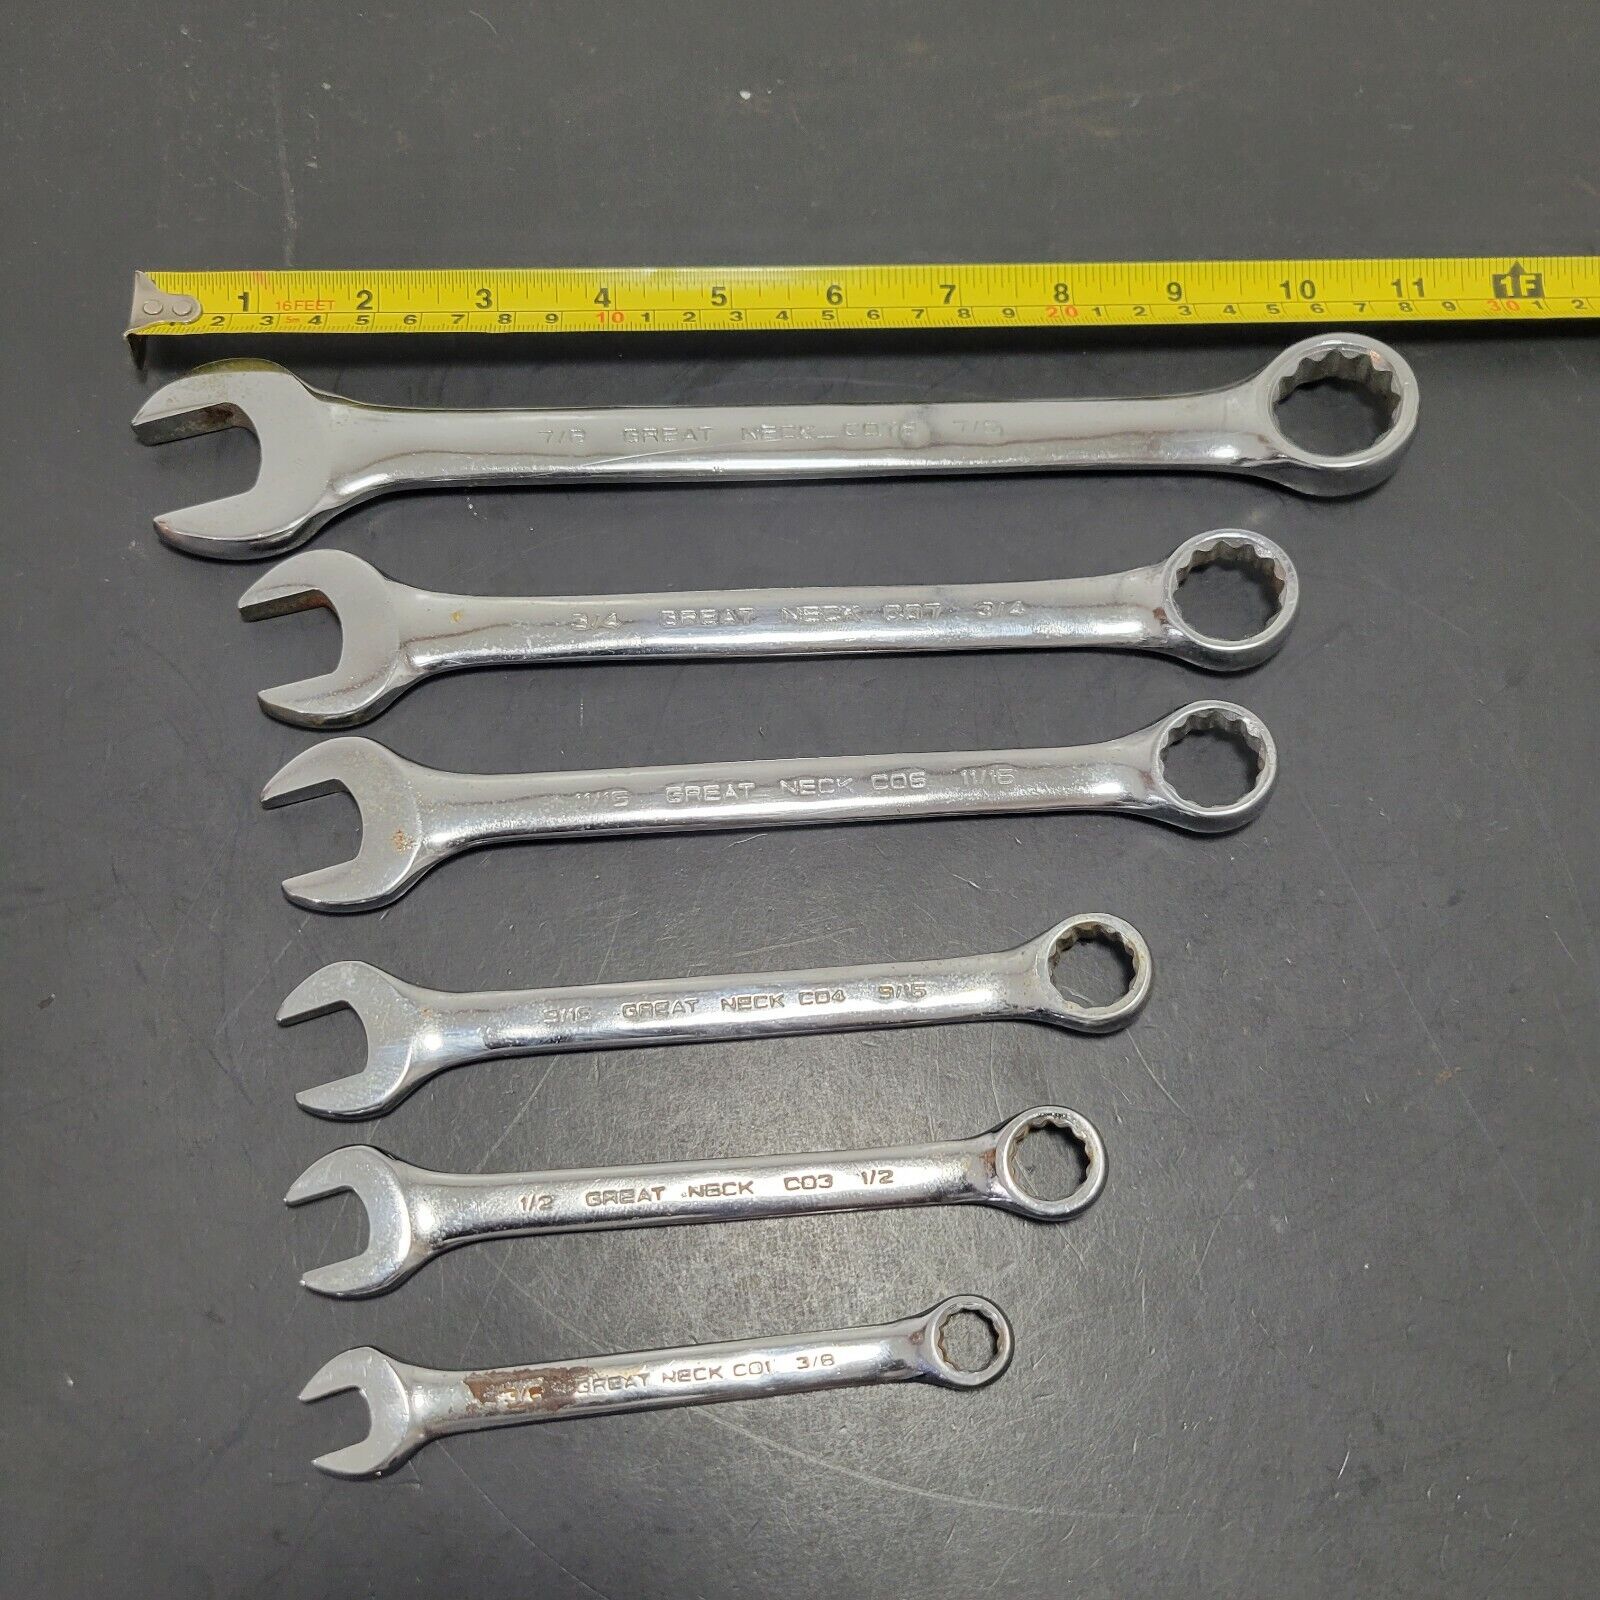 Lot of 6 Great Neck Combination Wrenches 7/8" 3/4" 11/16" 9/16" 1/2" 3/8" SAE 